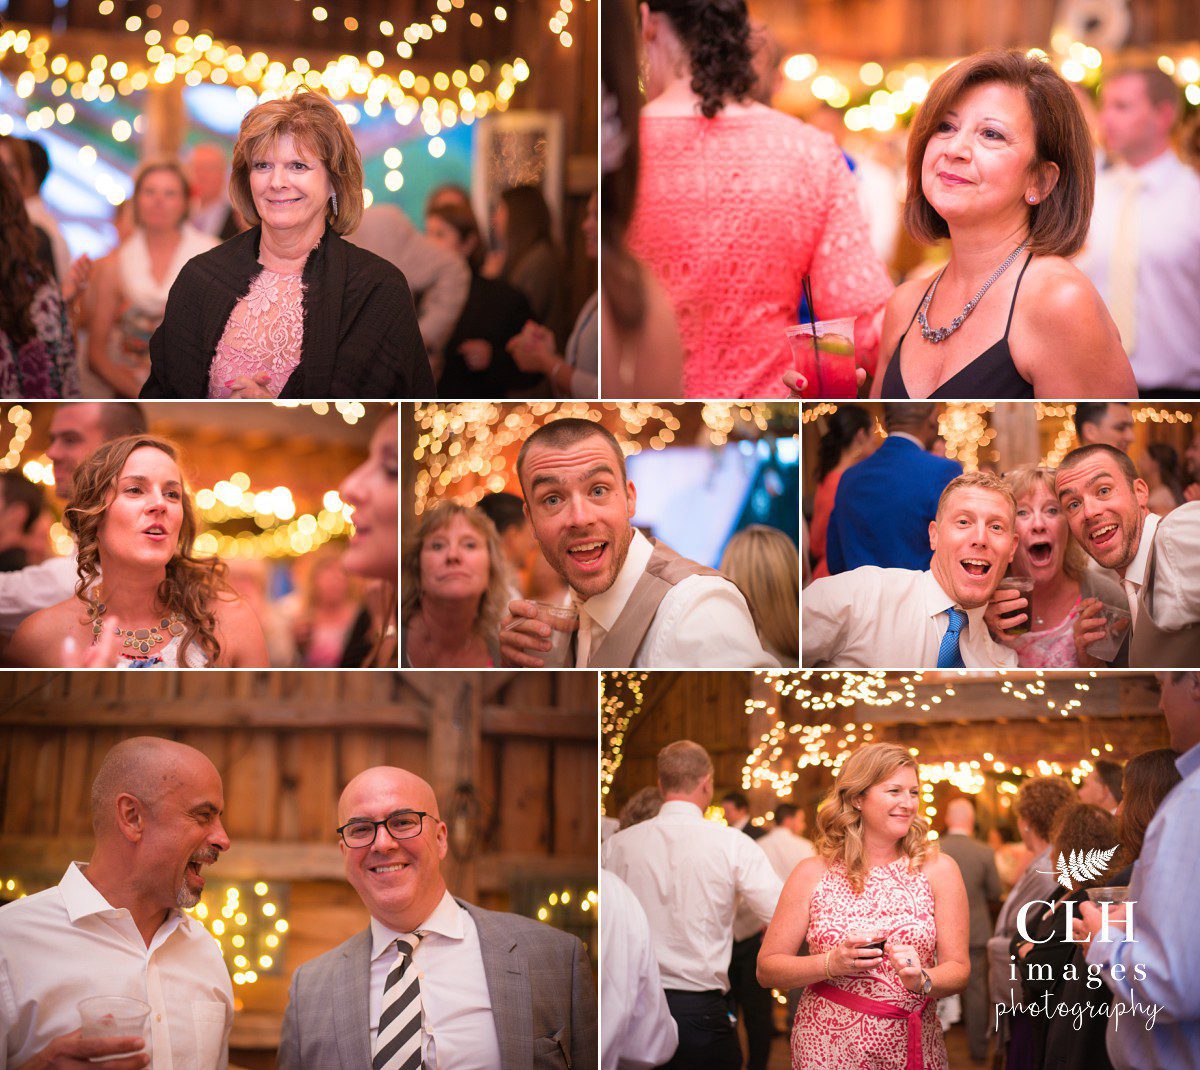 CLH images Photography - Adirondack Weddings - Adirondack Photographer - Rustic Wedding - Barn Wedding - Burlap and Beams Wedding - Jessica and Ryan (156)